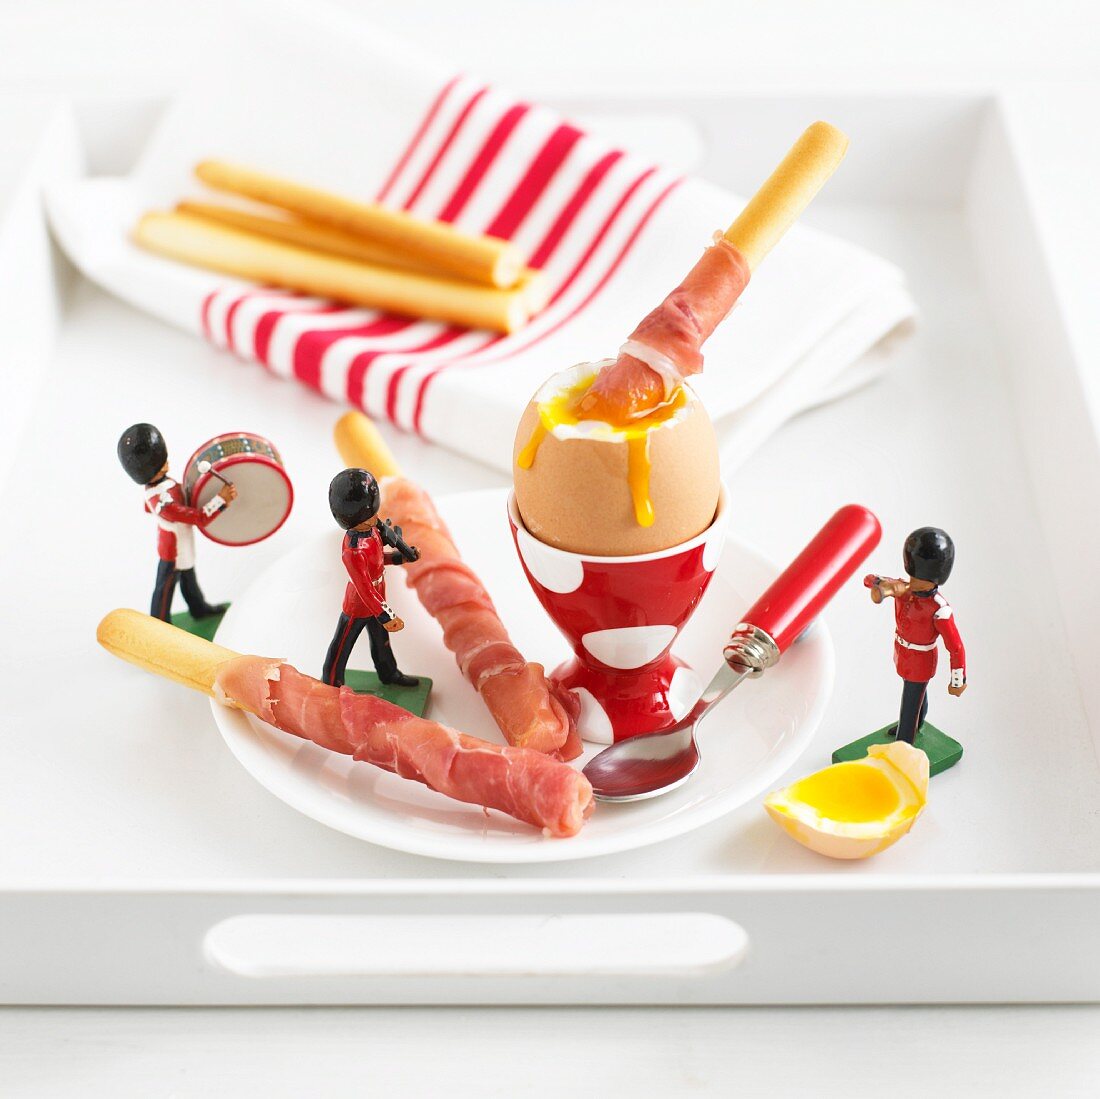 Grissini with ham, a soft boiled egg and toy figures